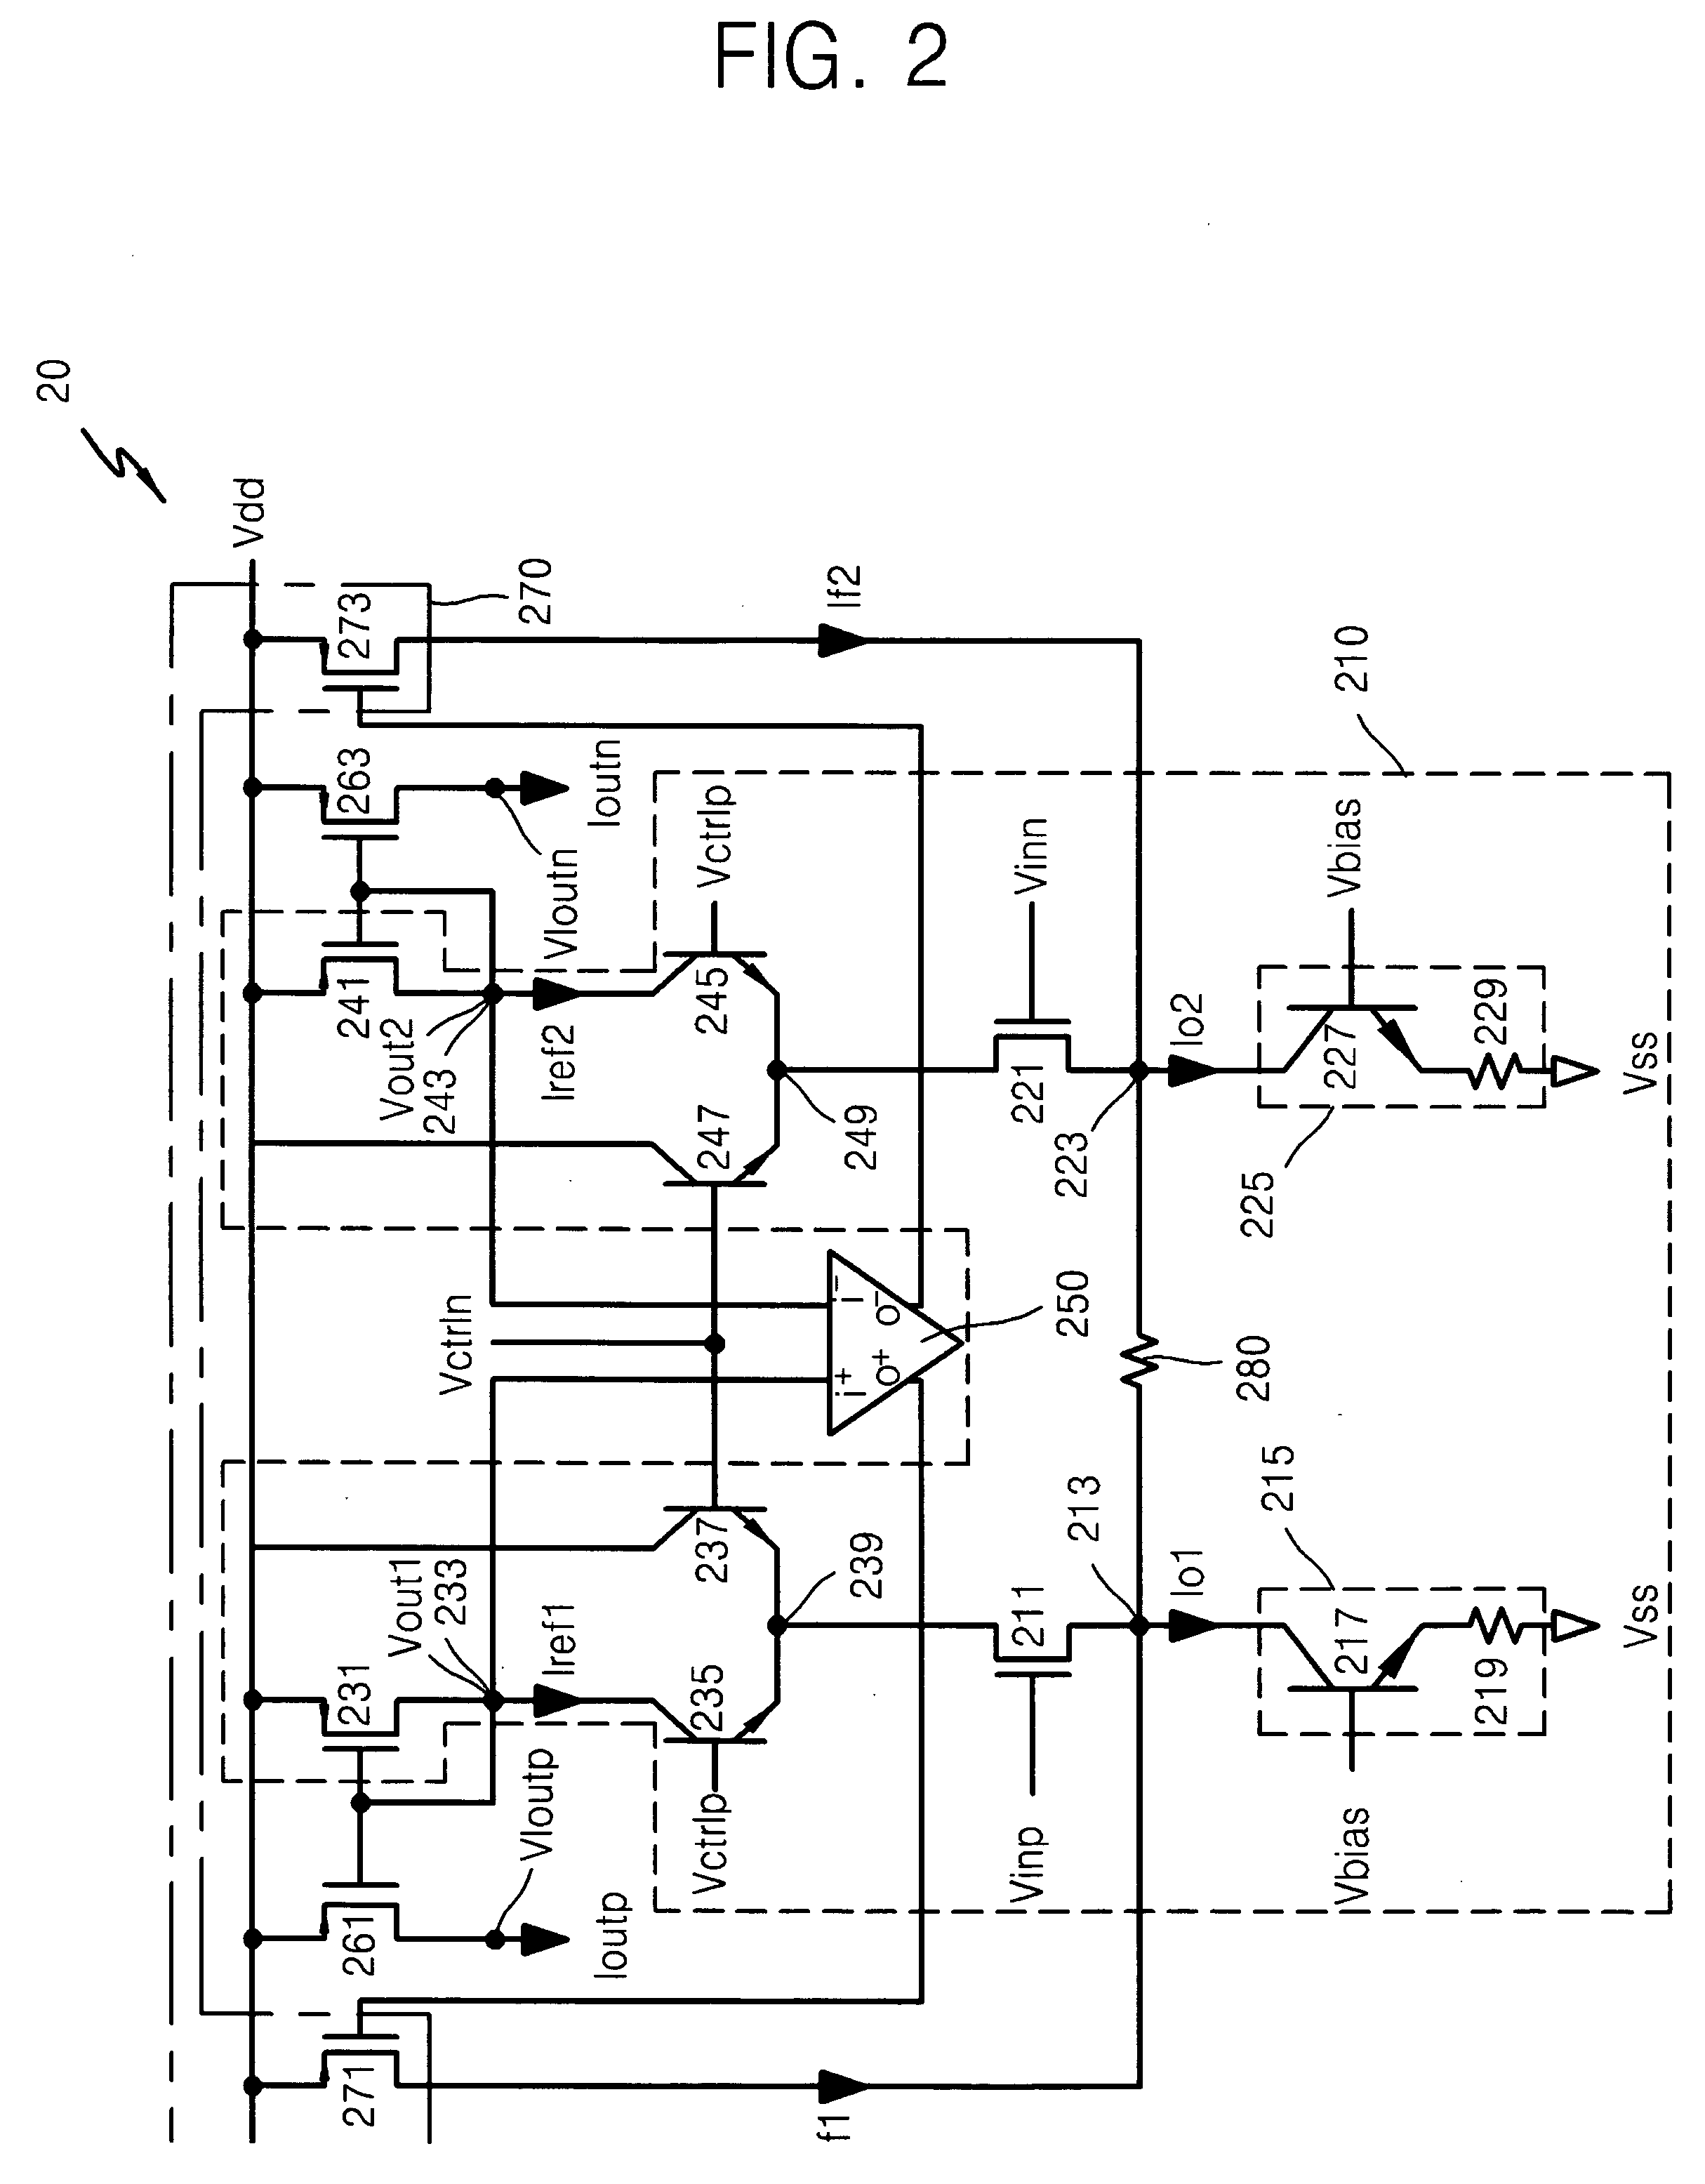 Apparatus and method for canceling DC output offset